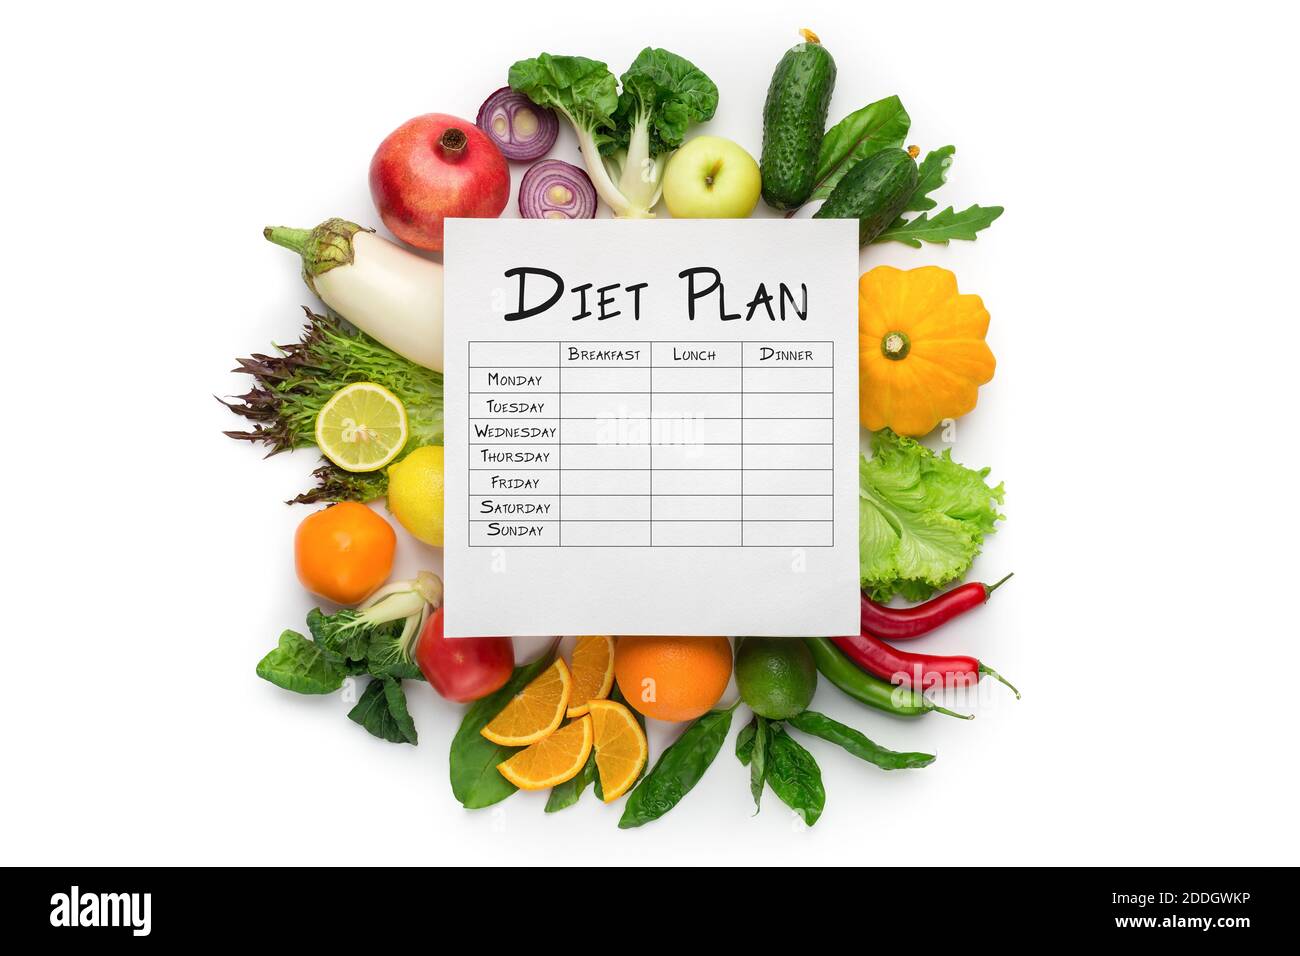 Weekly Diet Plan Table And Composition With Fresh Vegetables Over White Background Stock Photo